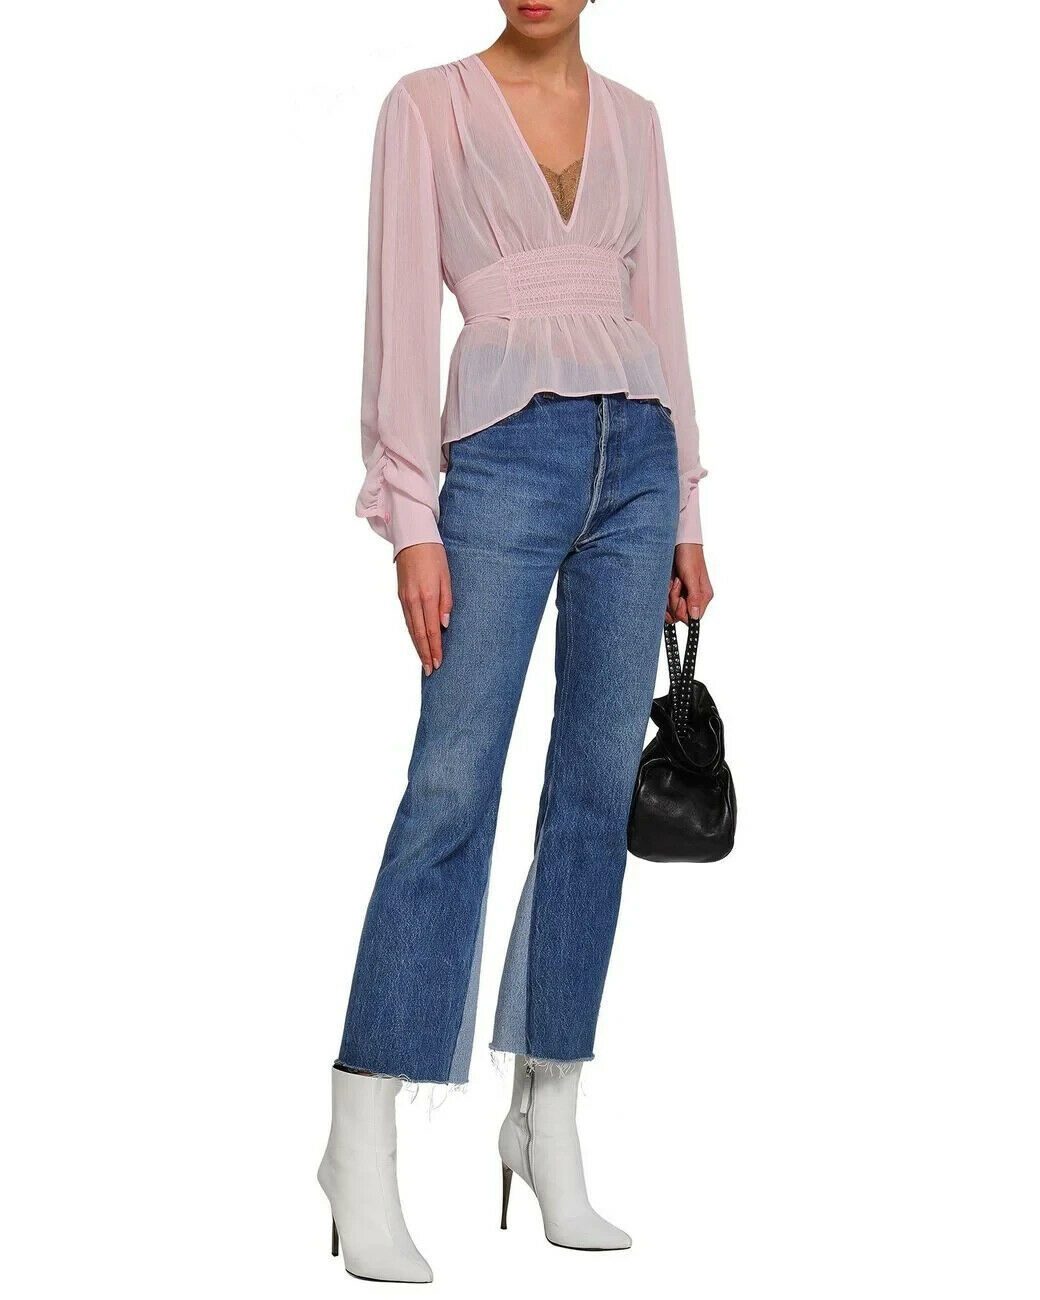 Primary image for NWT 100% AUTH Alexa Chung Pink Chiffon Smock Blouse $415